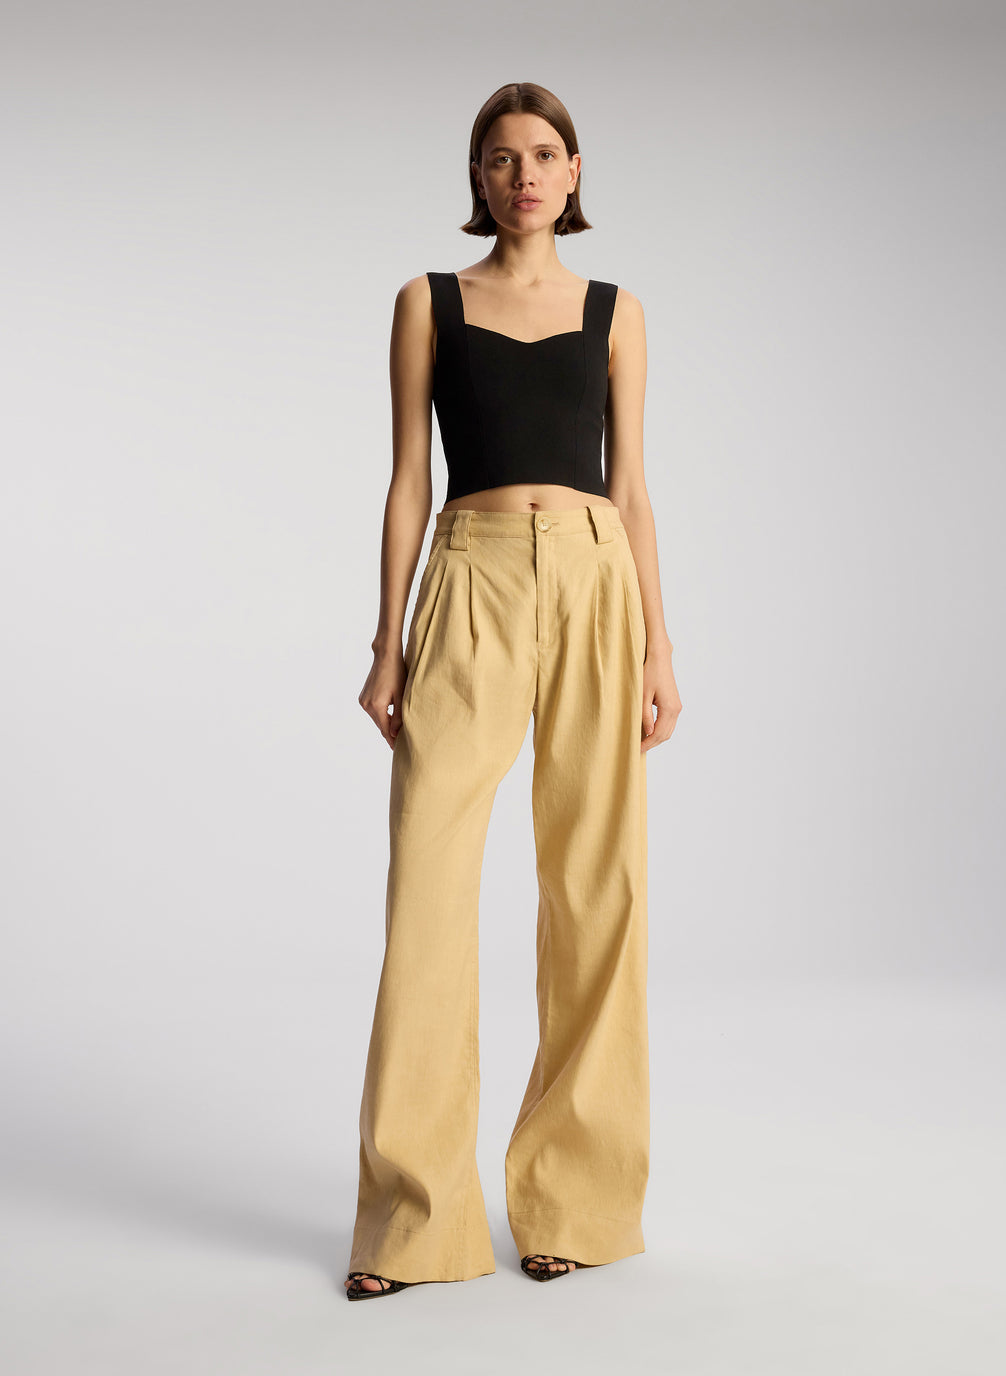 front view of woman wearing black sleeveless compact knit top and tan pants